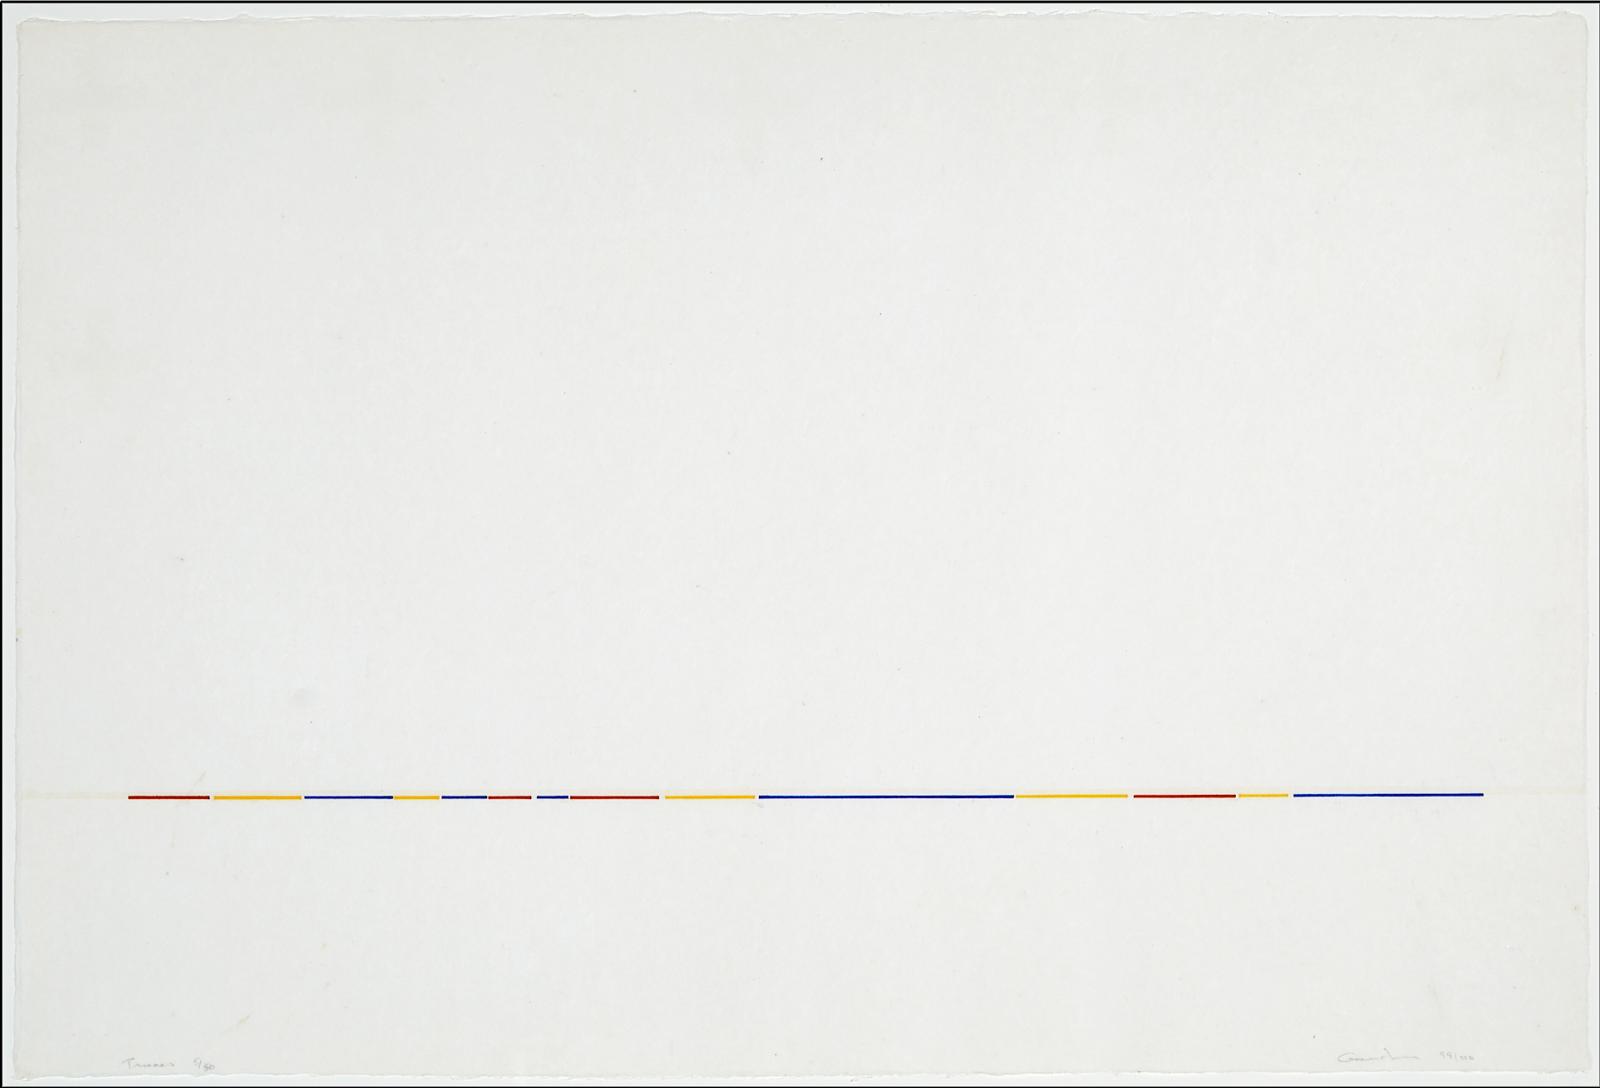 Yves Gaucher (1934-2000) - TRACES, 1999-2000